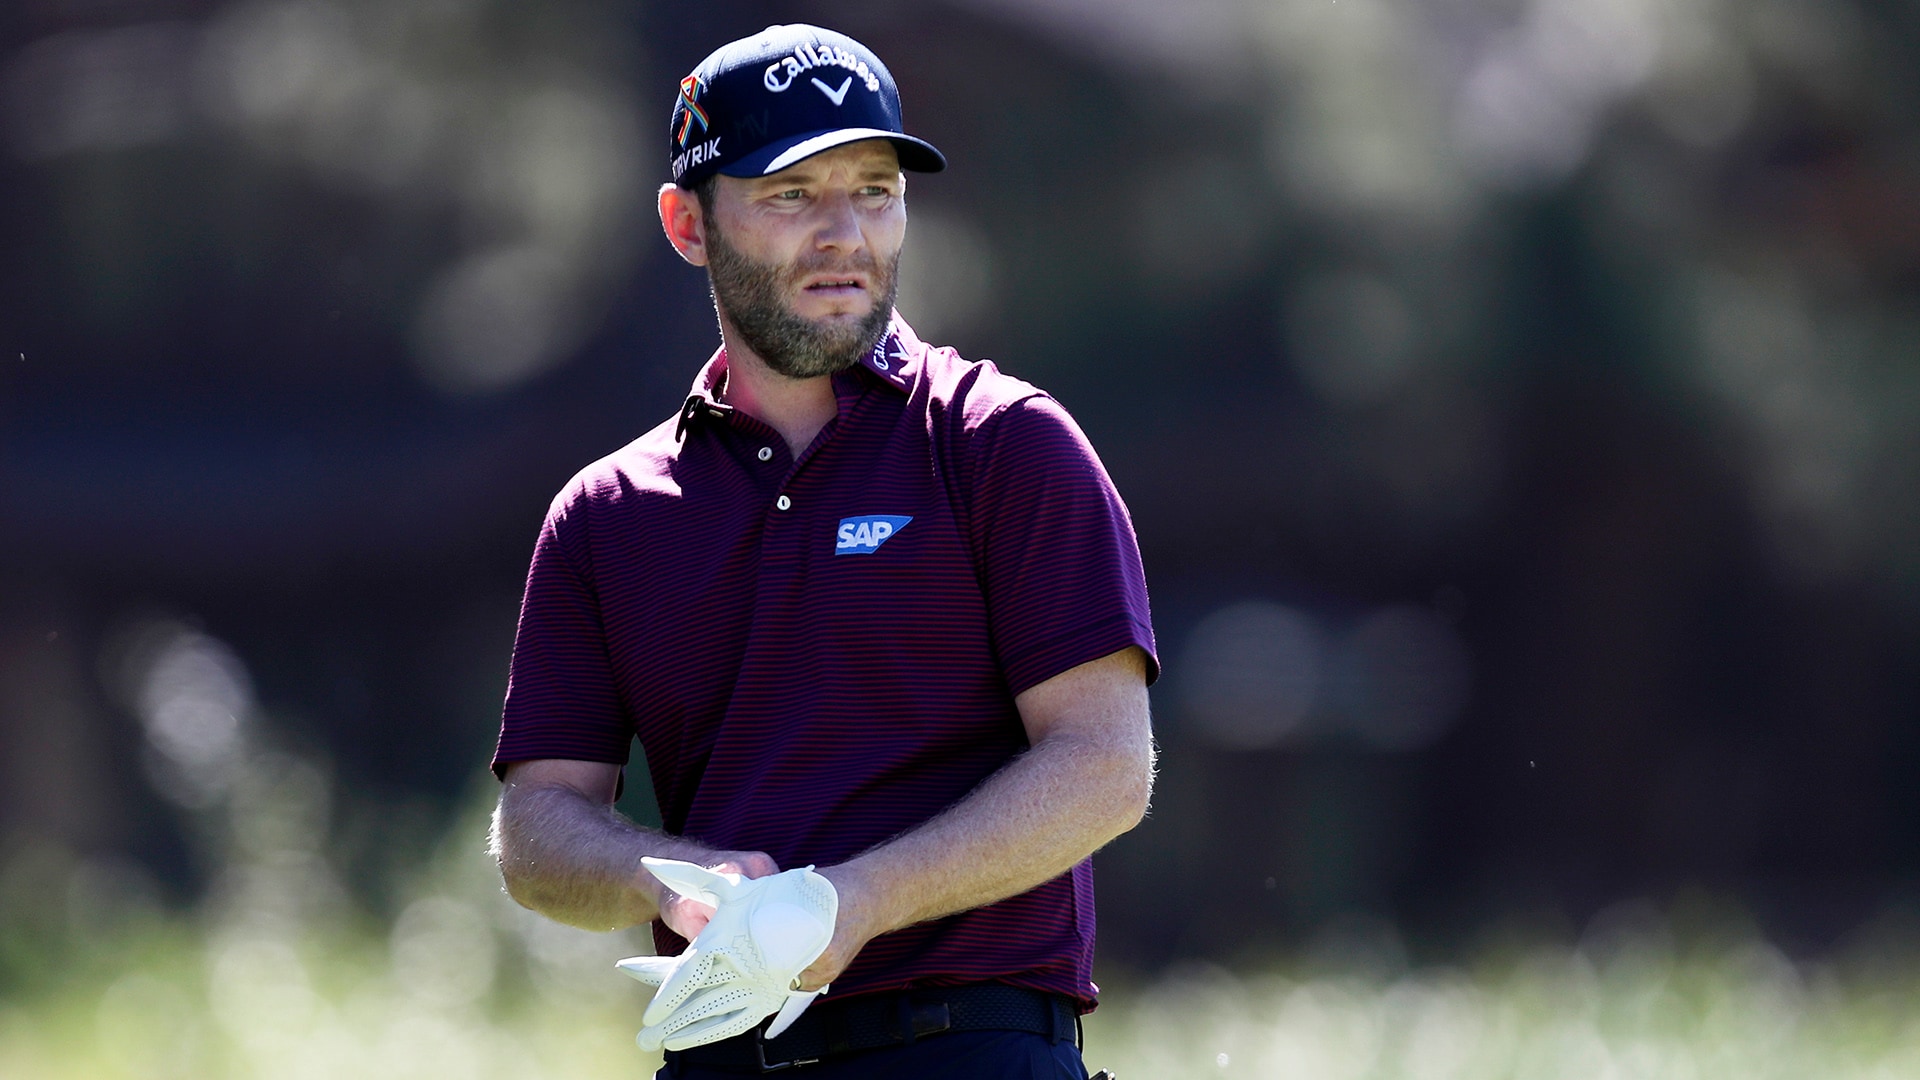 Branden Grace tests positive for COVID-19, WDs while T2 at Barracuda